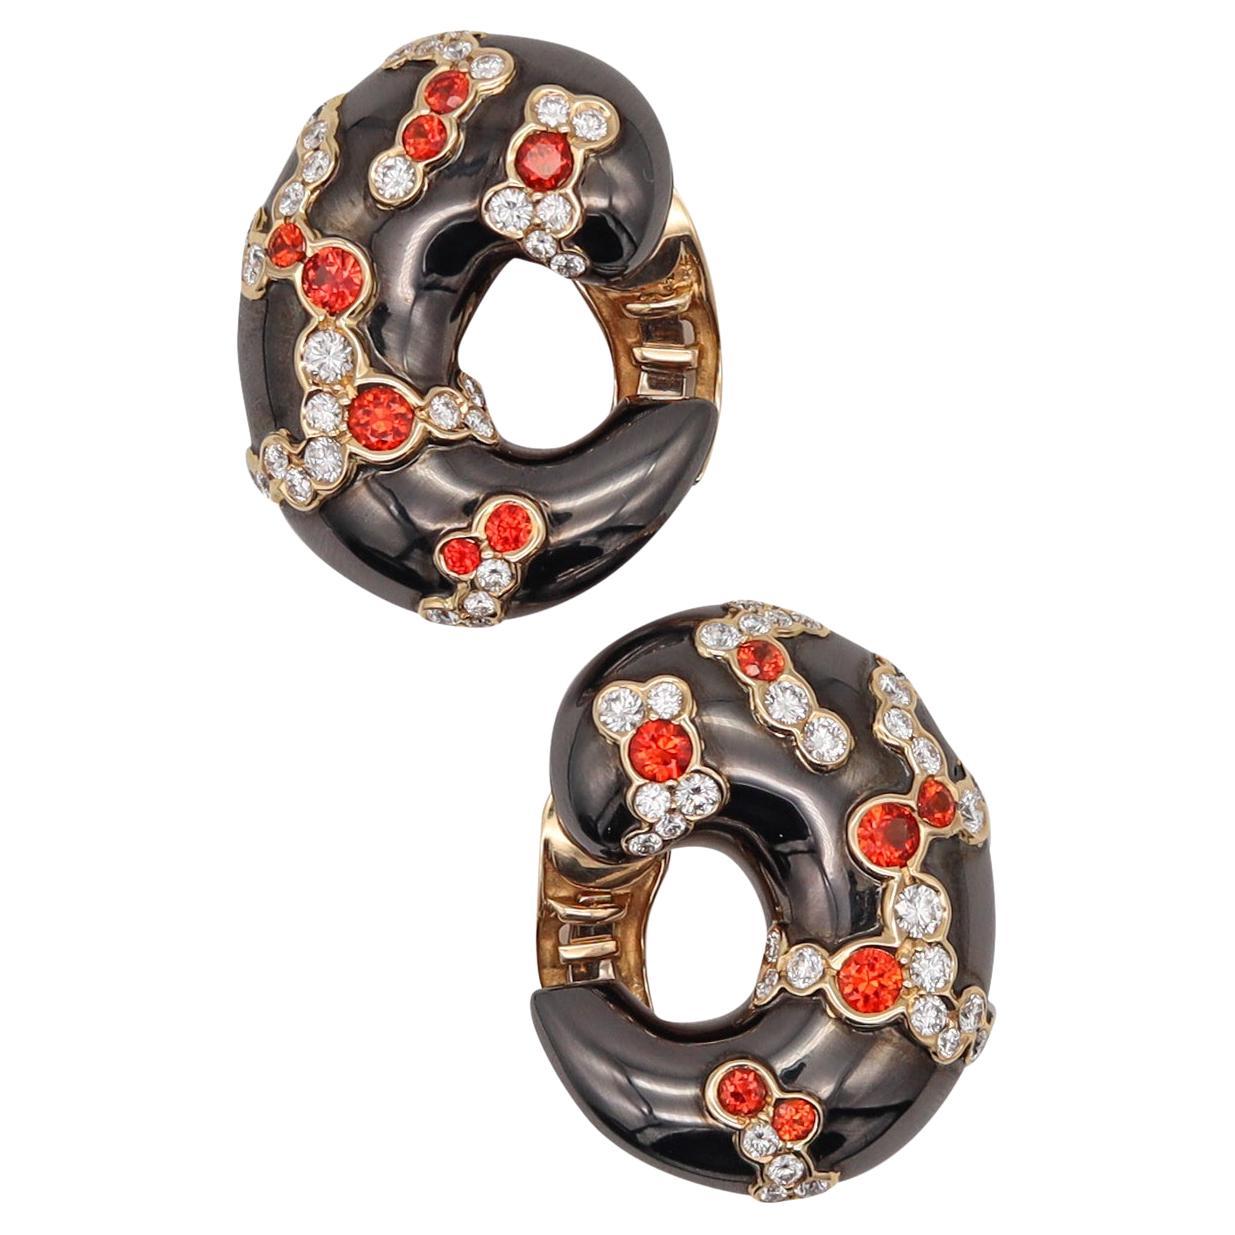 Marina B. Milan Gem Set Earclips in 18Kt Gold with 8.26 Cts Diamonds & Sapphires